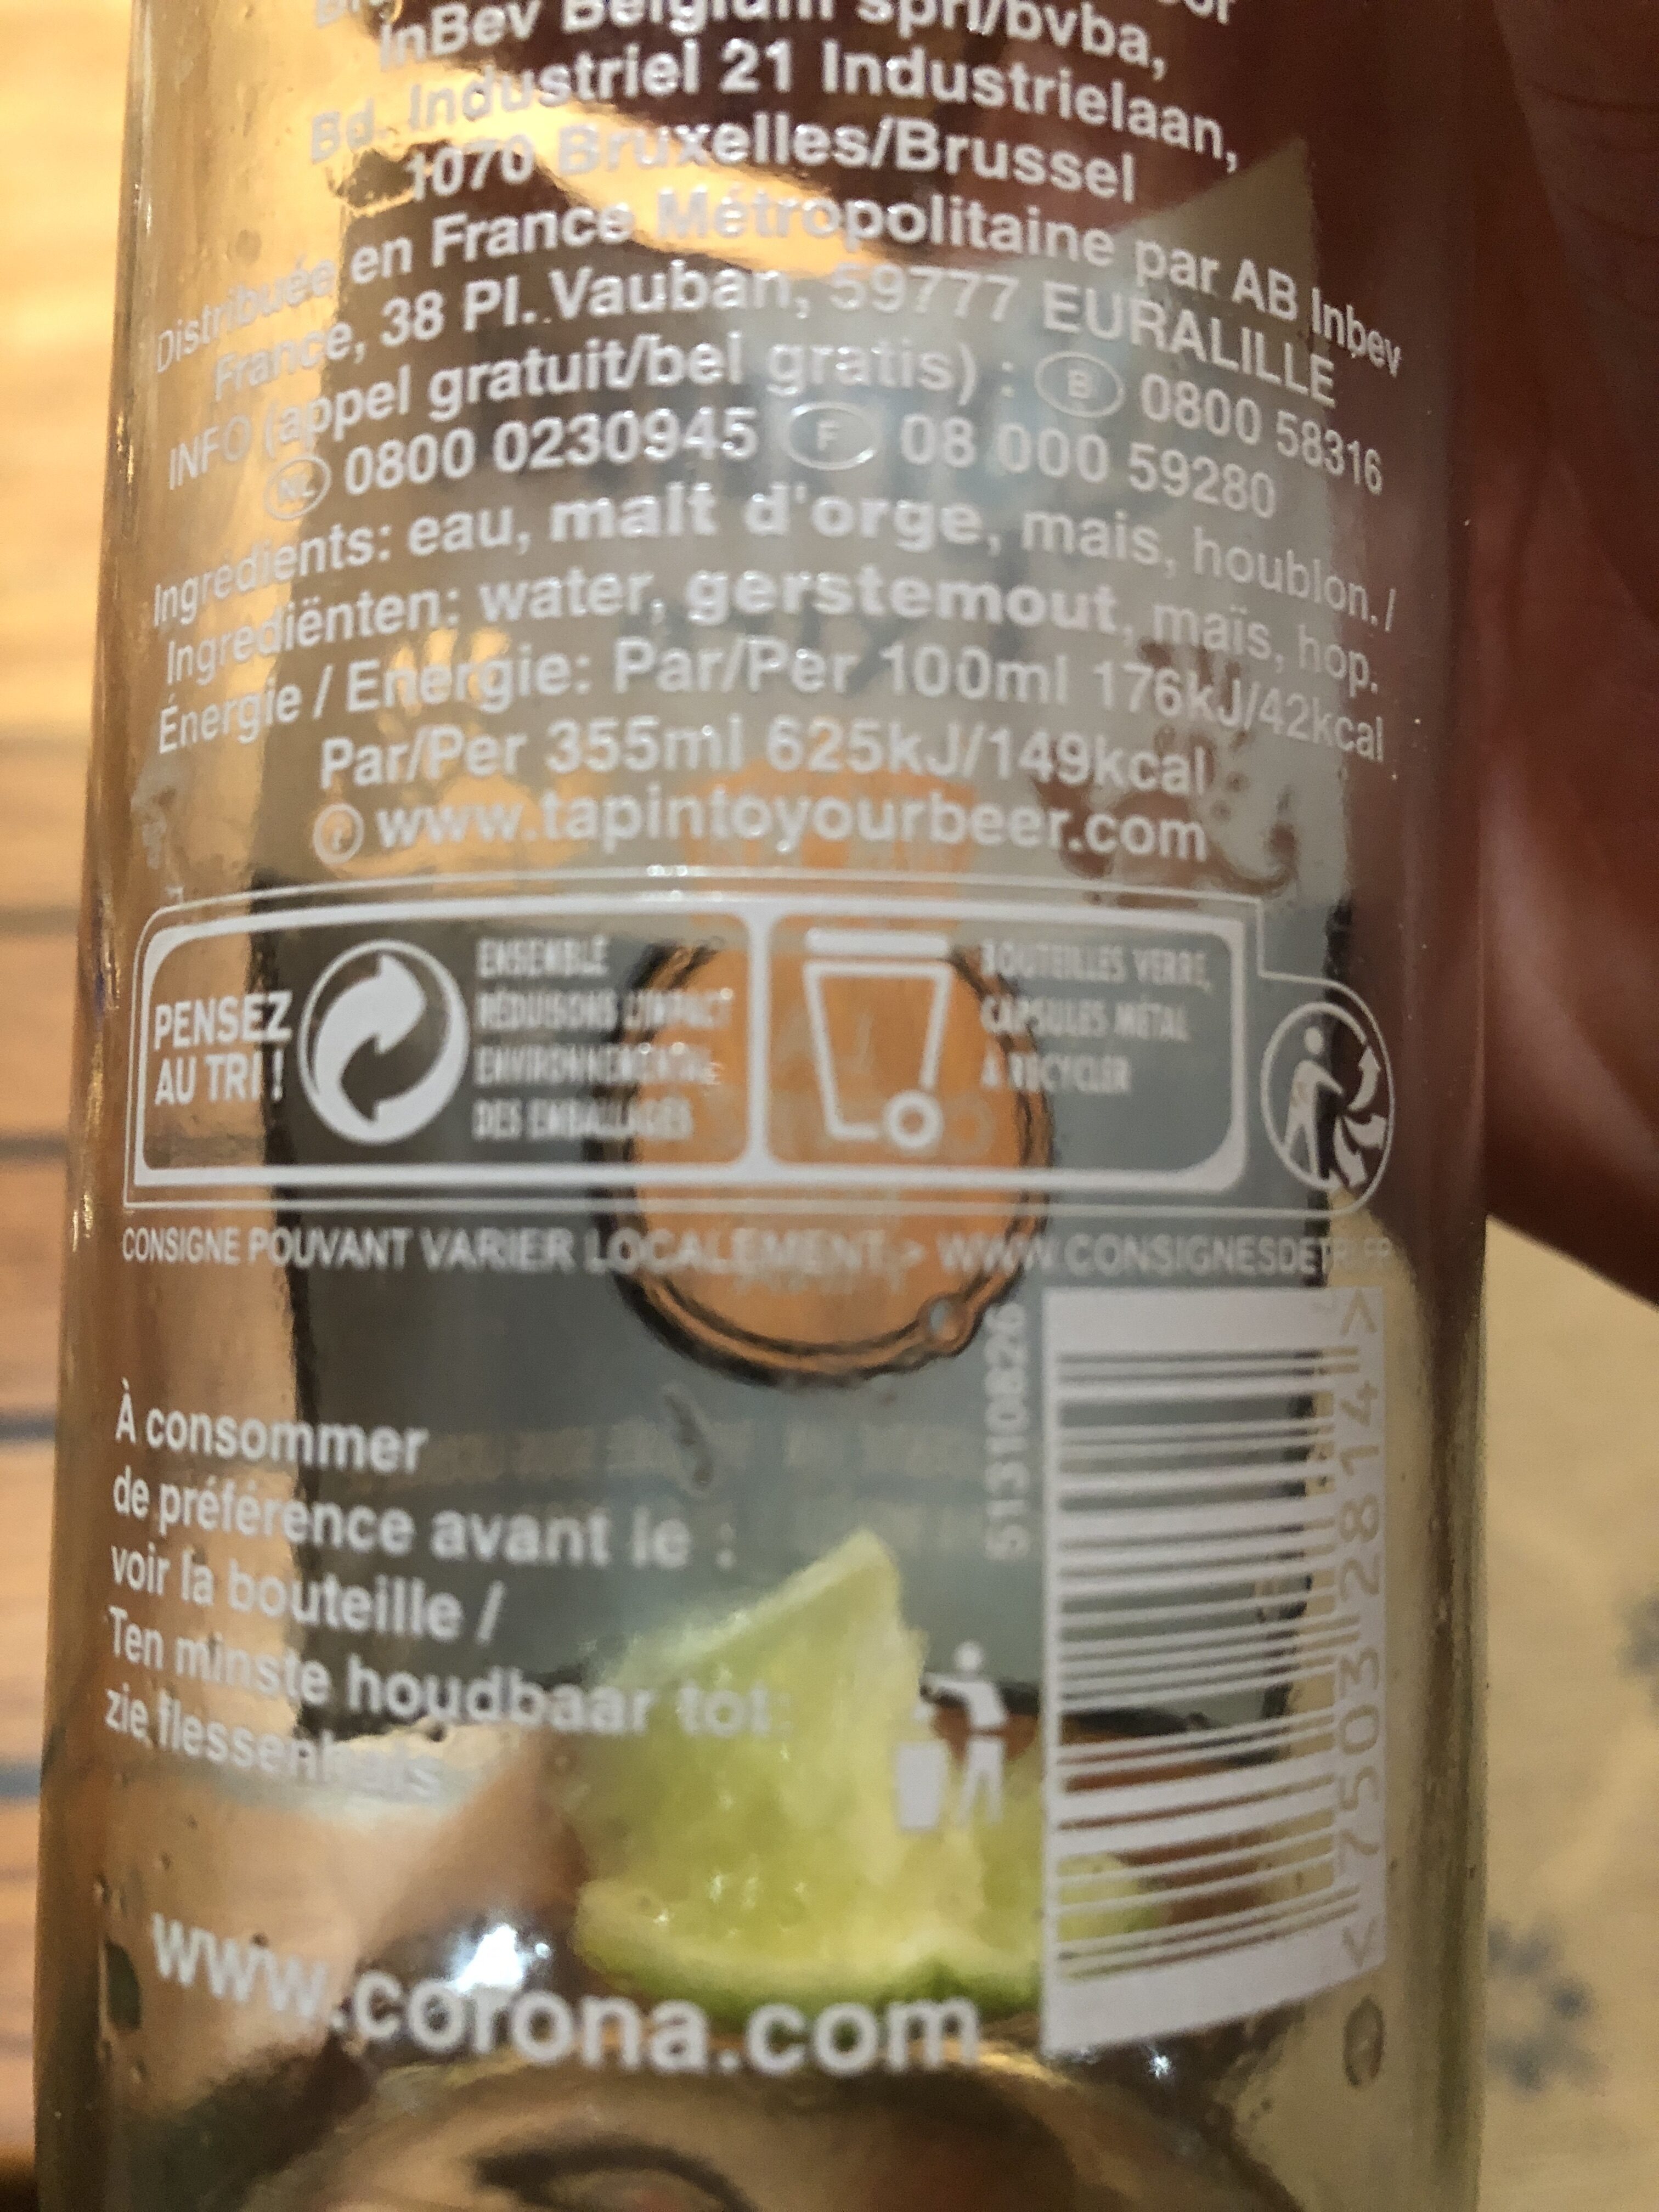 Corona - Recycling instructions and/or packaging information